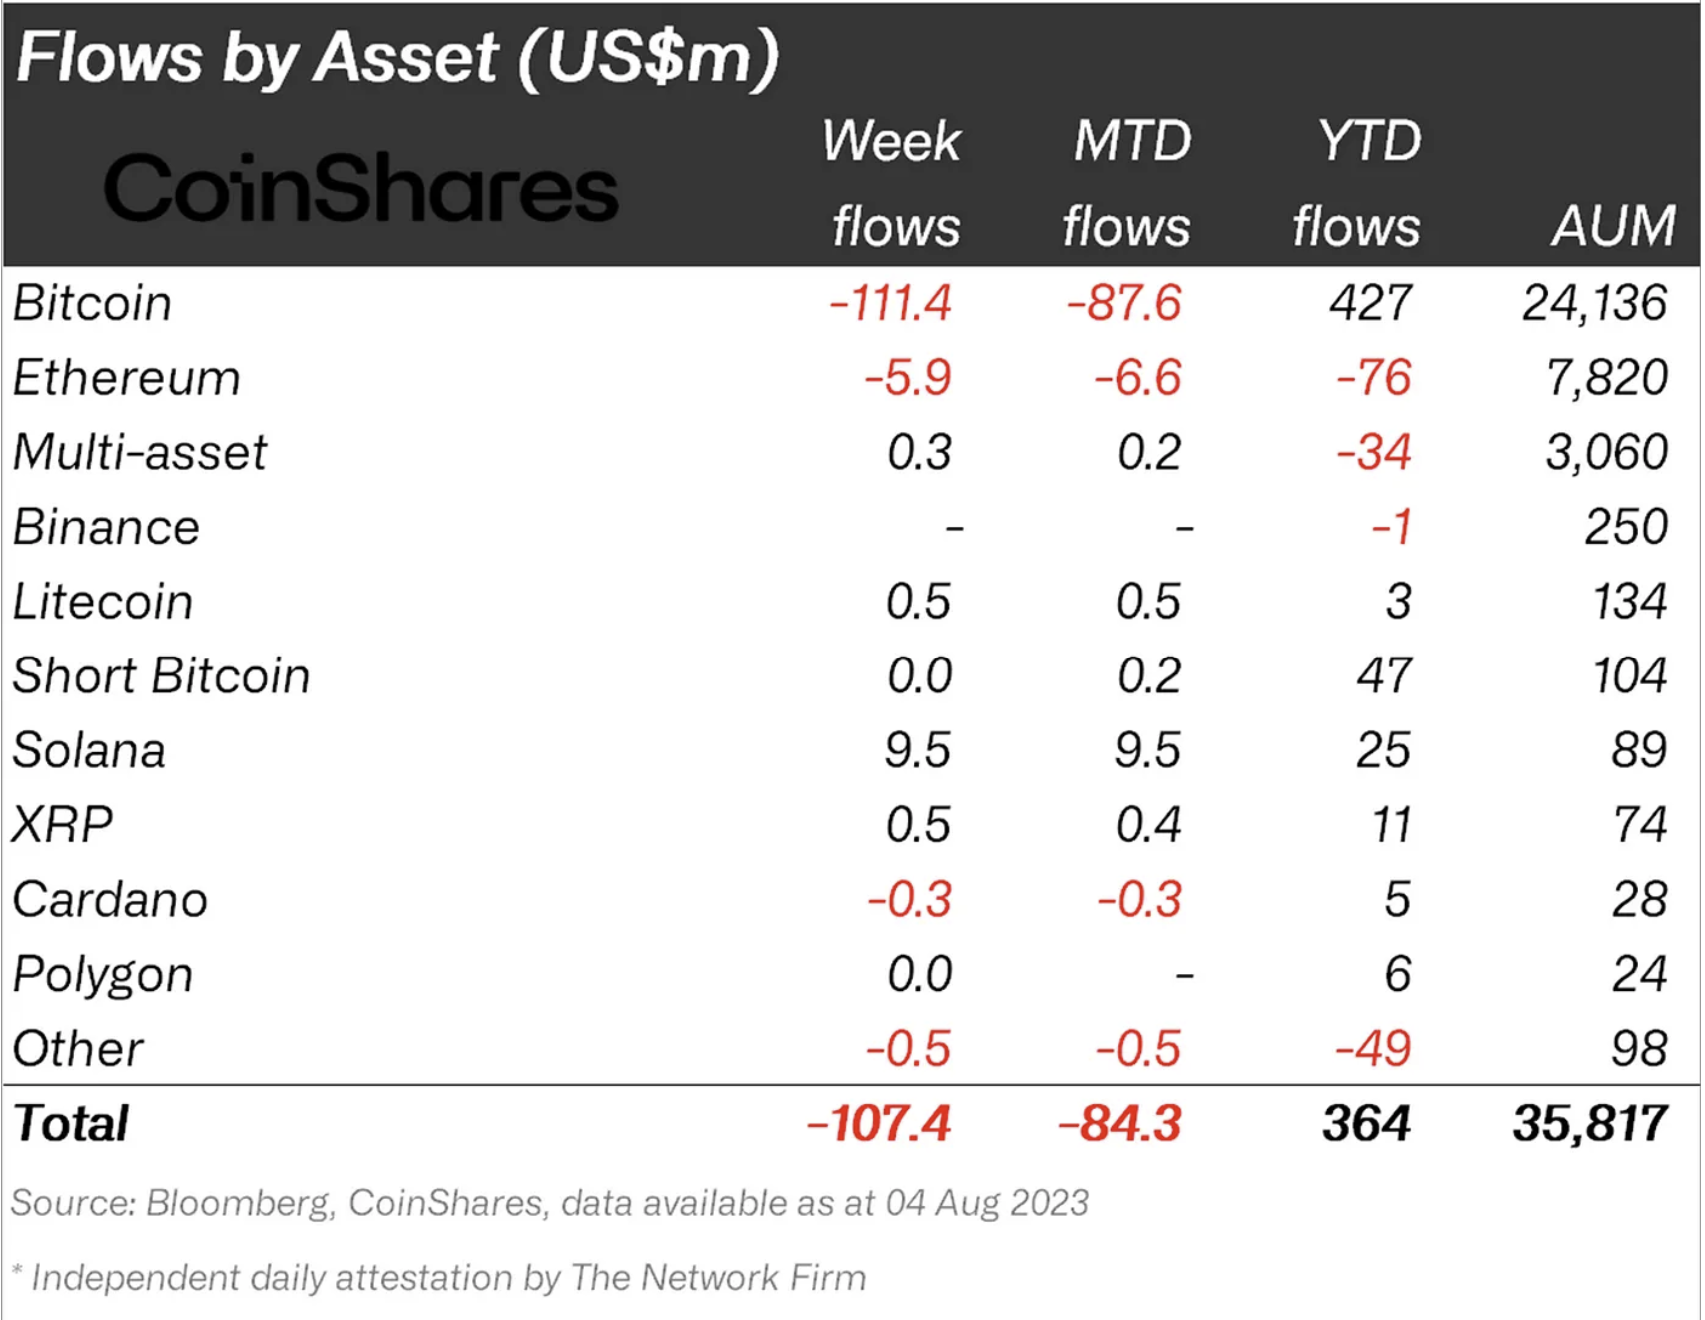 Flows by crypto asset